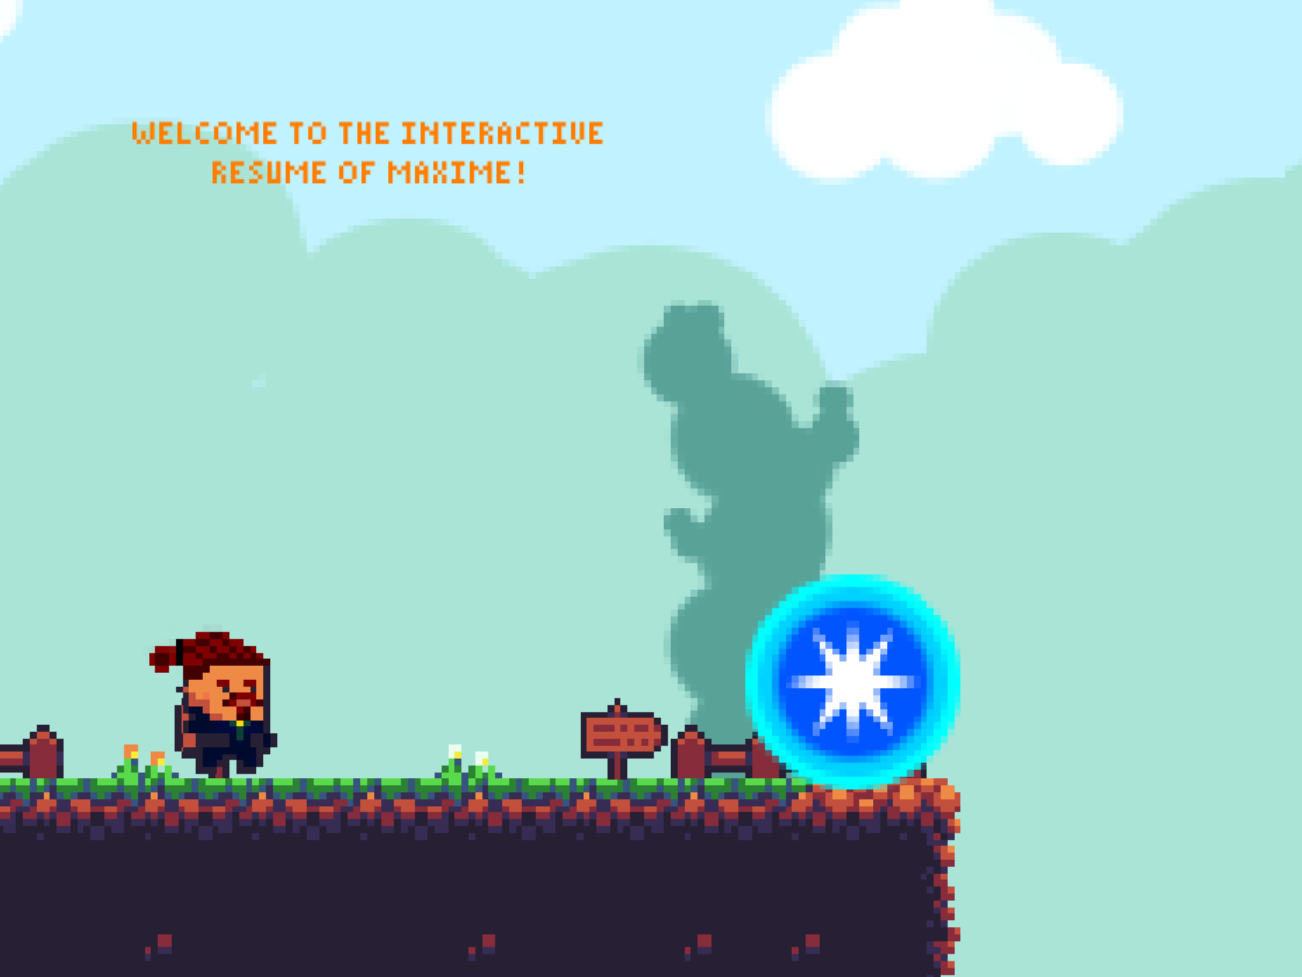 Interactive resume in the form of a platformer